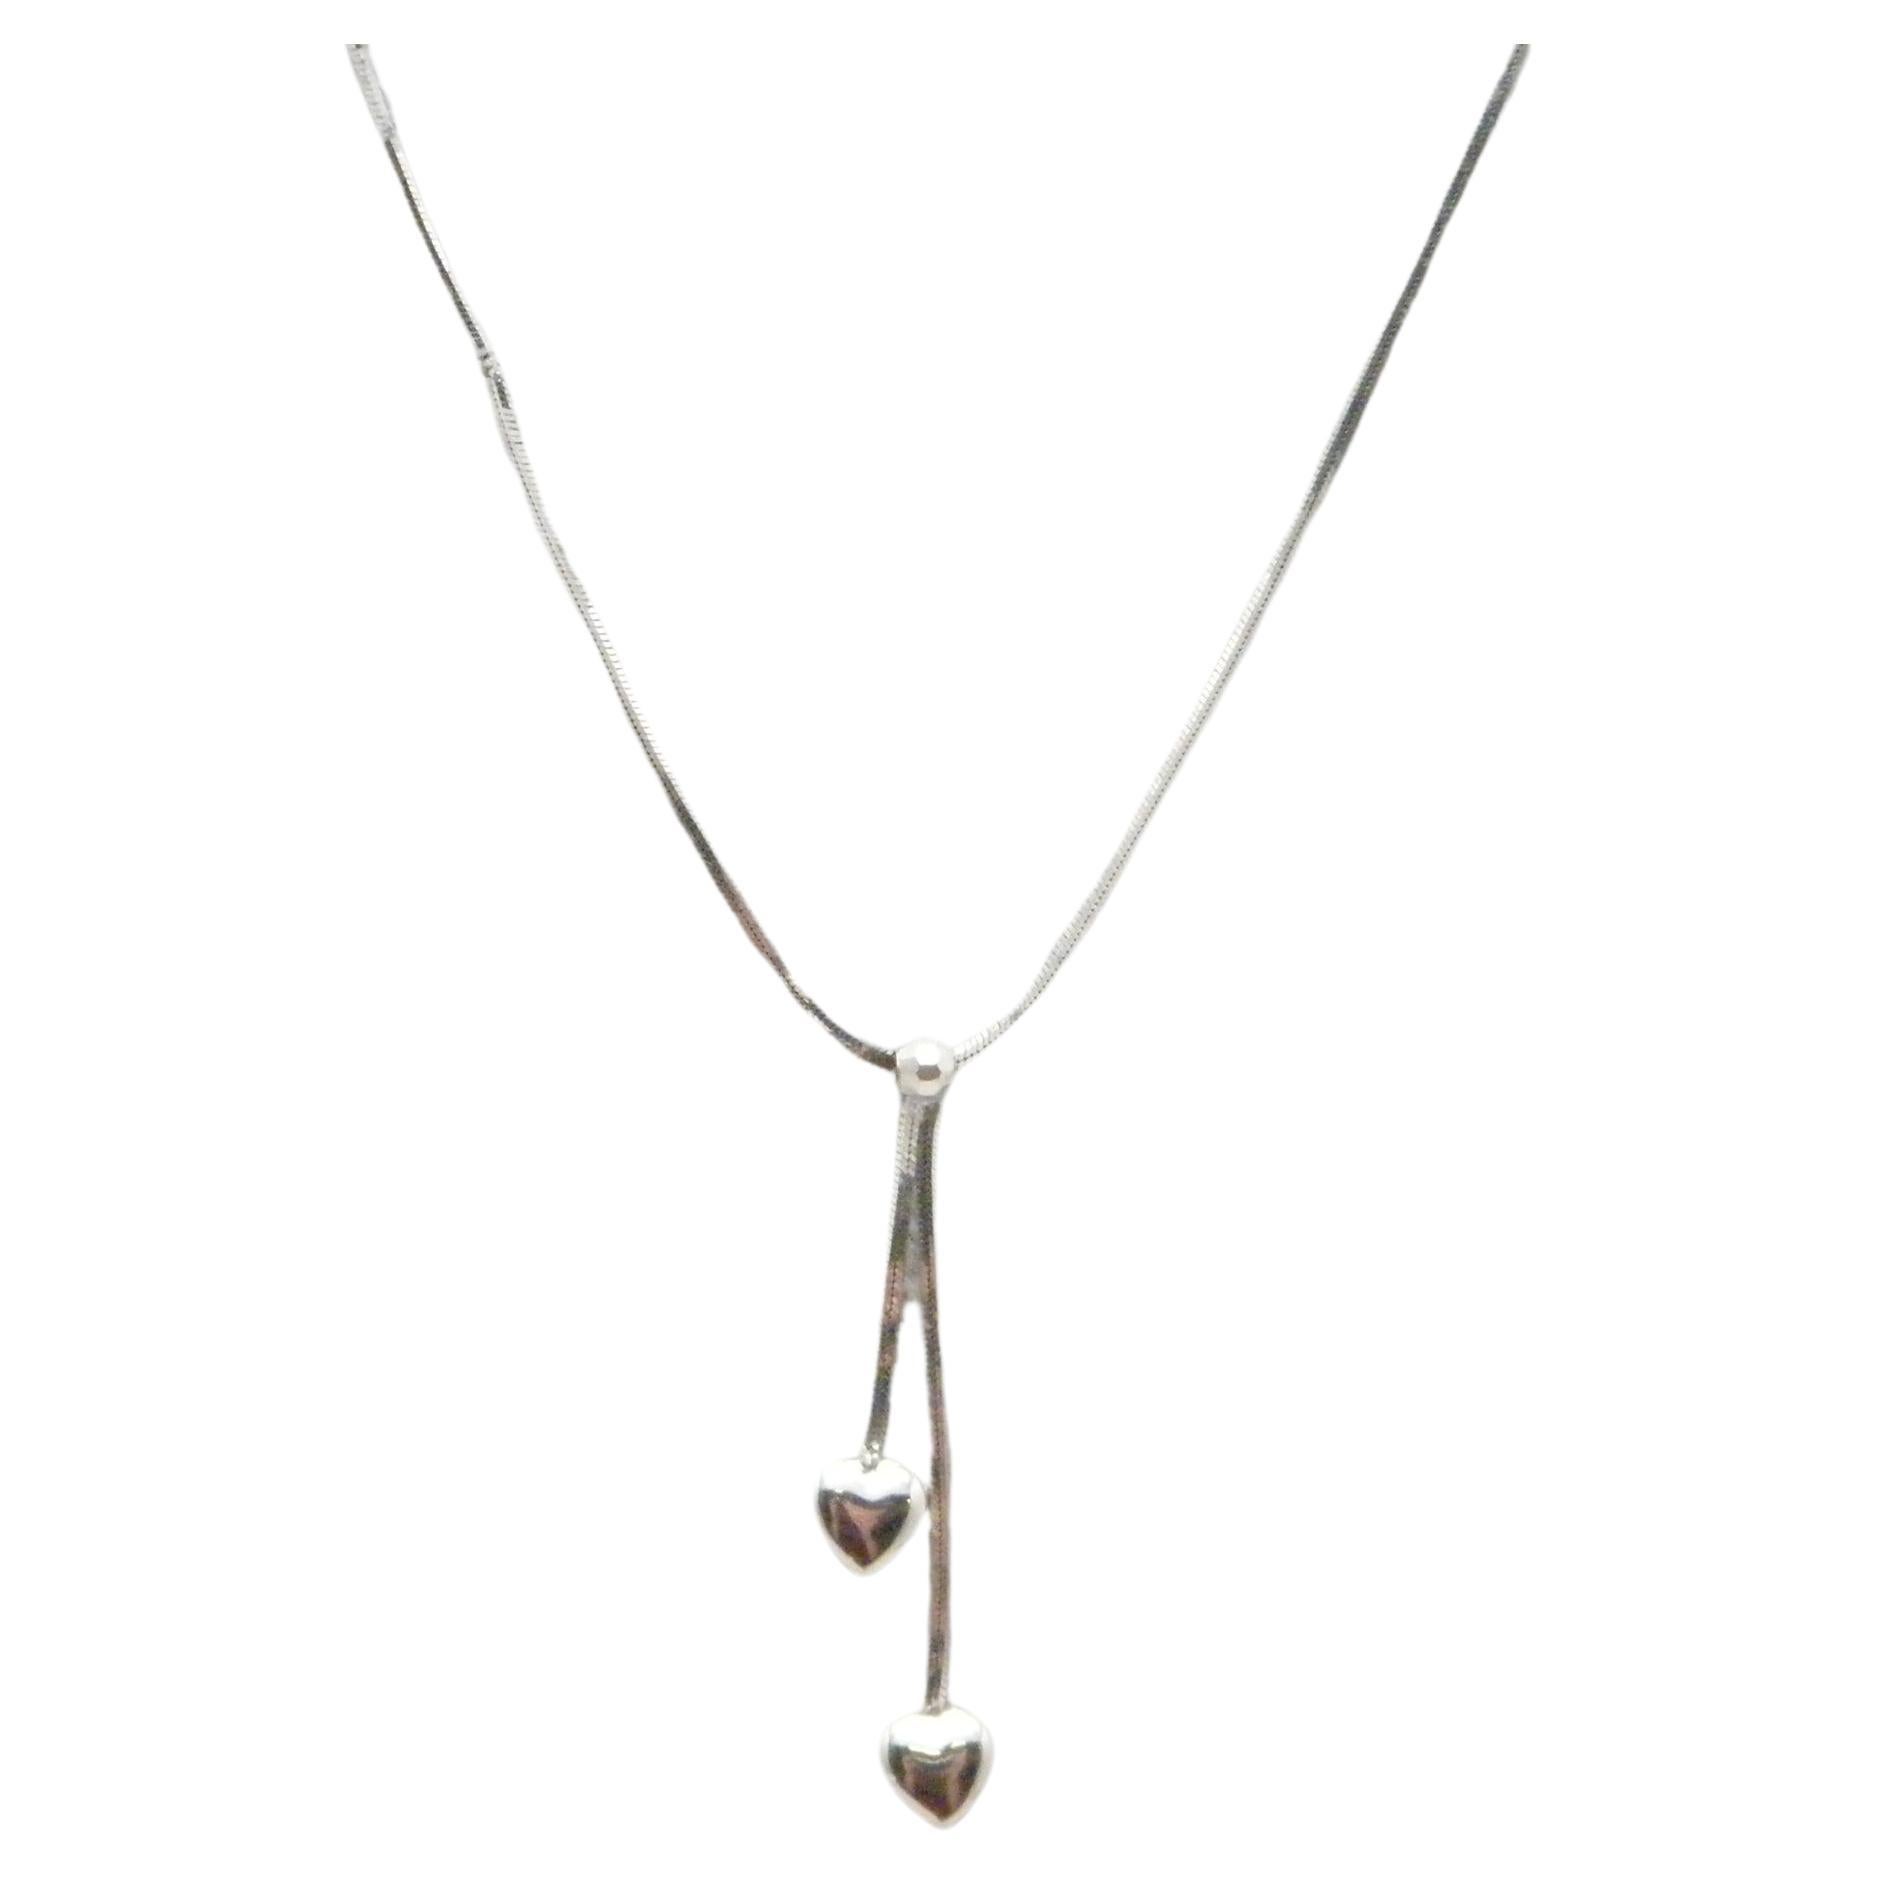 Vintage 9ct White Gold Twin Heart Lariat Pendant Necklace 16 Inch Snake Chain For Sale